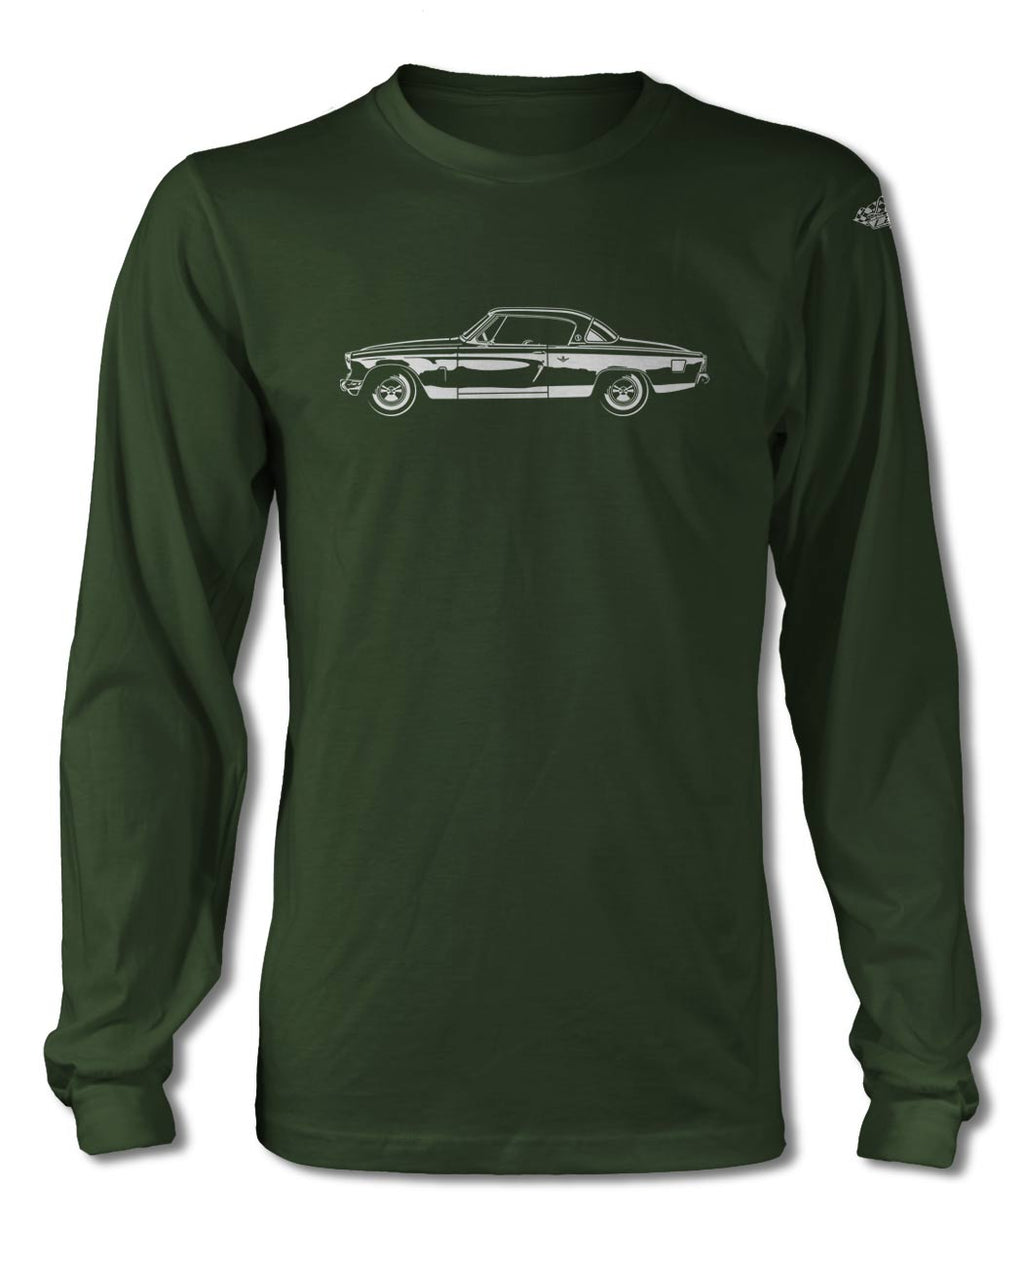 Studebaker Starlight Coupe 1953 T-Shirt - Long Sleeves - Side View